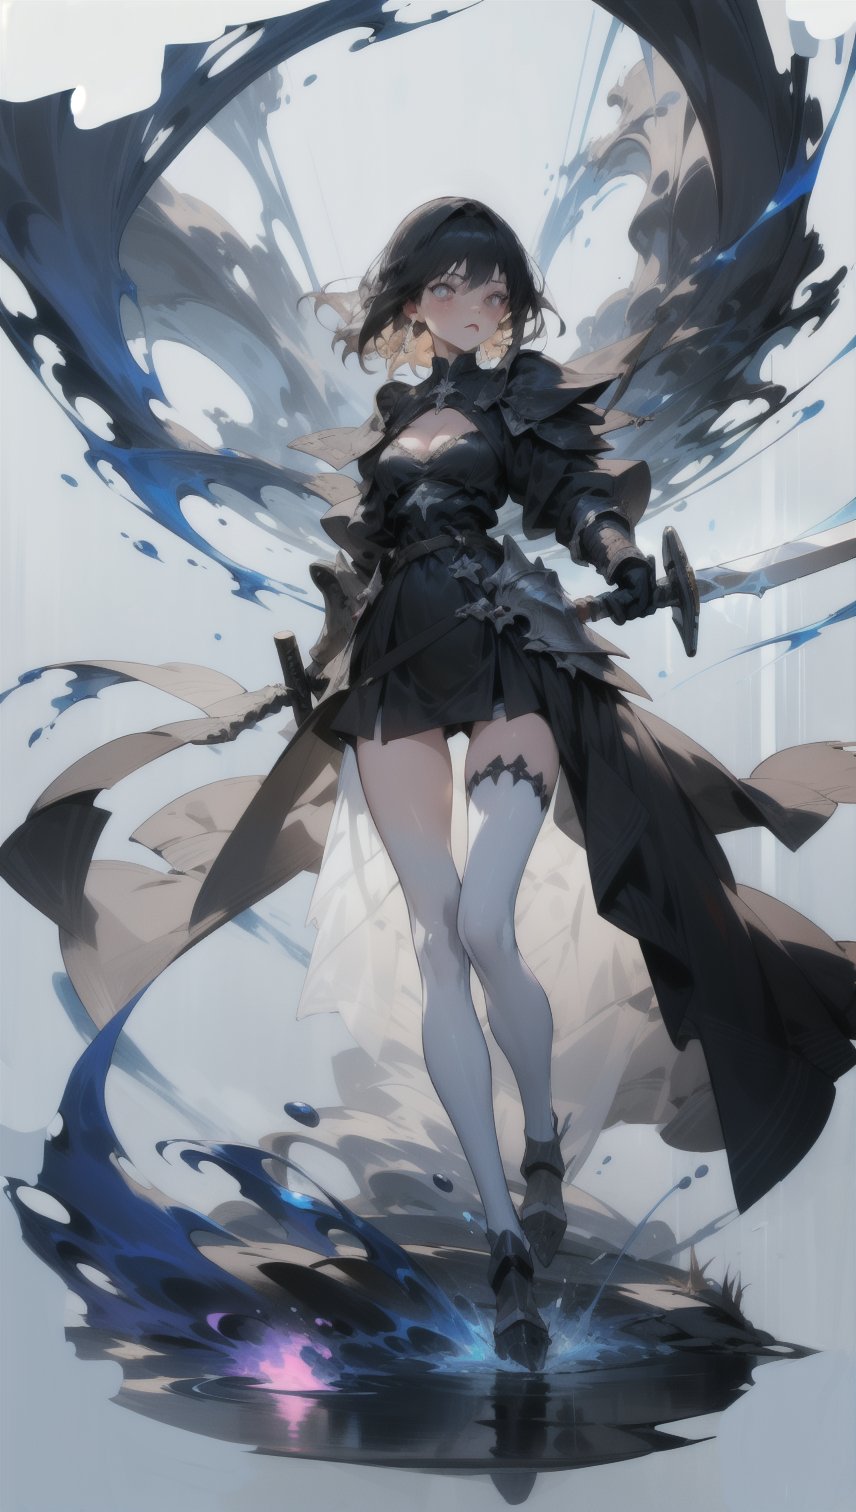 Anigame, vivid, raw, 1girl, solo, full_body, cleavage, long dress, very_long_hair, 21years old, levitating, dash jumping, (floating in the air)), sharp image, ((black_full_armor)), (((pointing sword with two hands towards alter))), ((glowing sword)), lava, soul, demon, death, knight, fights monsters, bright_light, dark_light, action side view, active, queen, supernatural, beauty, sexy, random background, neon lights, (fit in the frame)dynamic_angle, large_breasts, dynamic_lighting, dynamic_action, cleavage, (dynamic pose), ((see_through)), string, minimal fabric ,clothes_tearing, dynamic effects, water, magic, thigh_gap, slim_body, slim_thigh, sorcerer ,Anigame ,pastelbg, legs_open, detailed_face, impossible_fit, fit_in_frame, full_body, sfw, facing_viewer,side_view,highres,More Detail, UHD,High detailed ,Color Booster,realistic,girl, pastelbg, beautiful_background, ((in the holy cathedral))